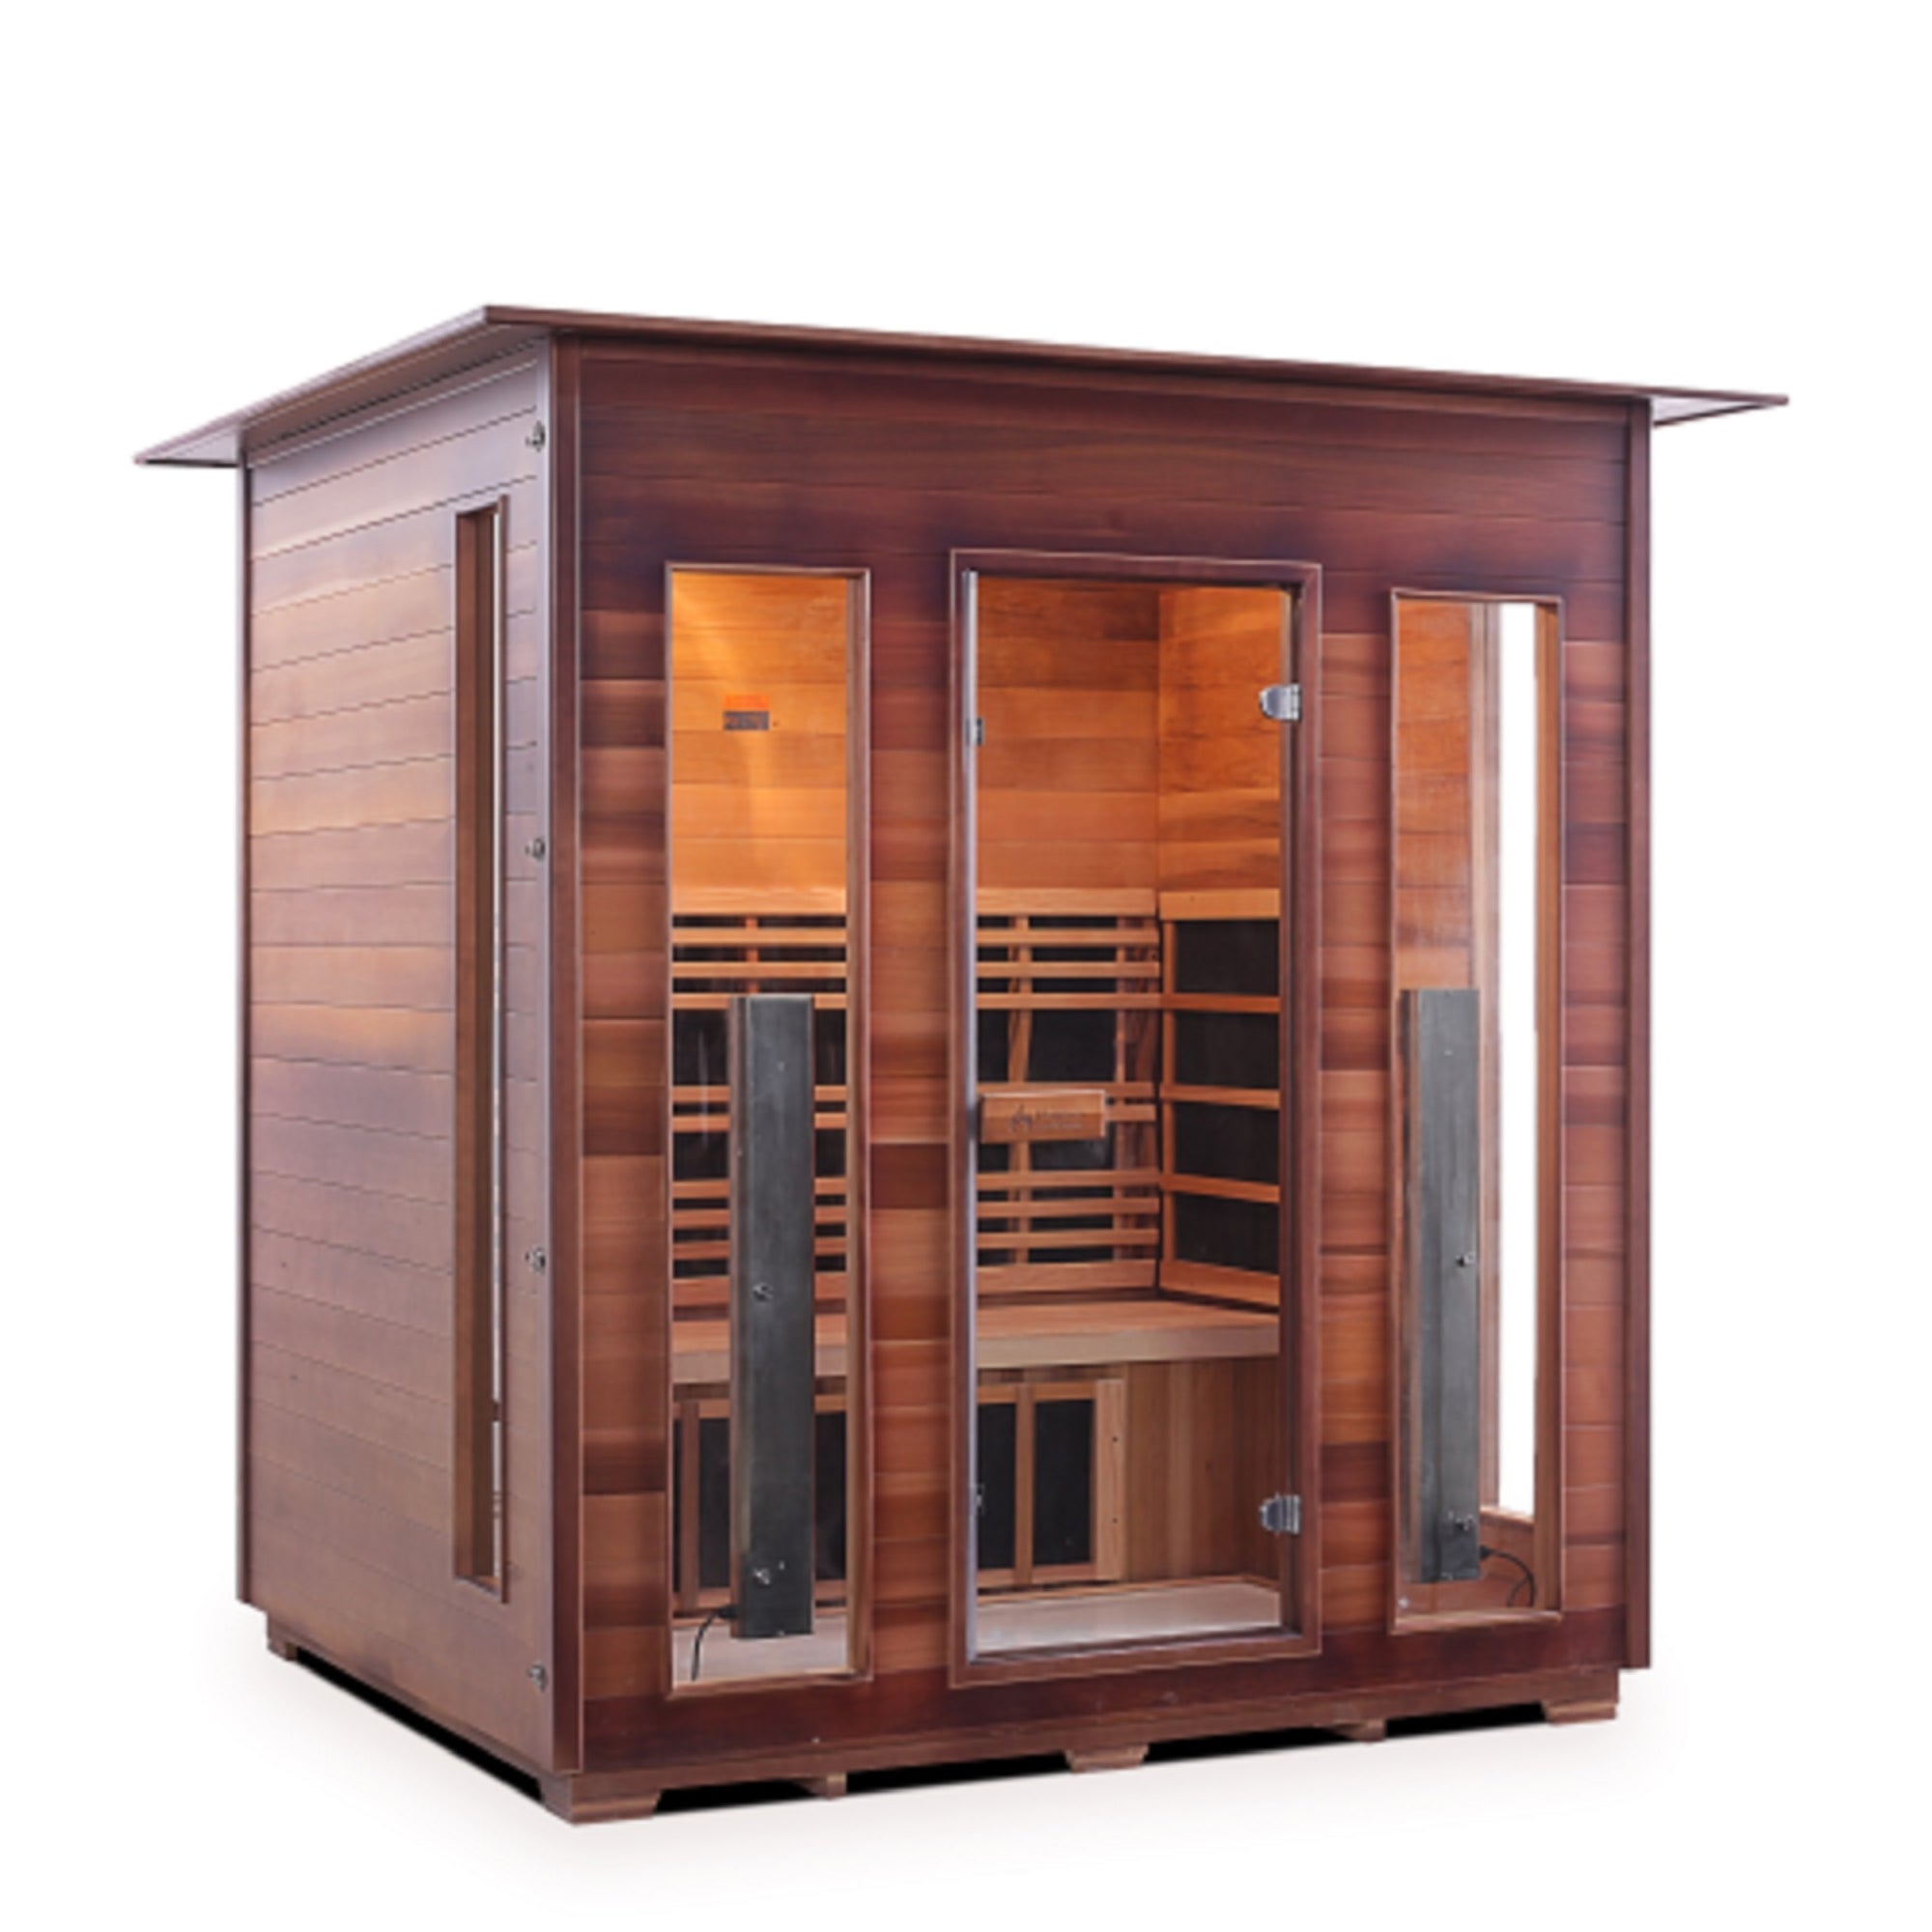 Enlighten Sauna Infrared/Traditional DIAMOND Canadian Red Cedar Wood Outside And Inside indoor Roofed four person sauna with glass door isometric view